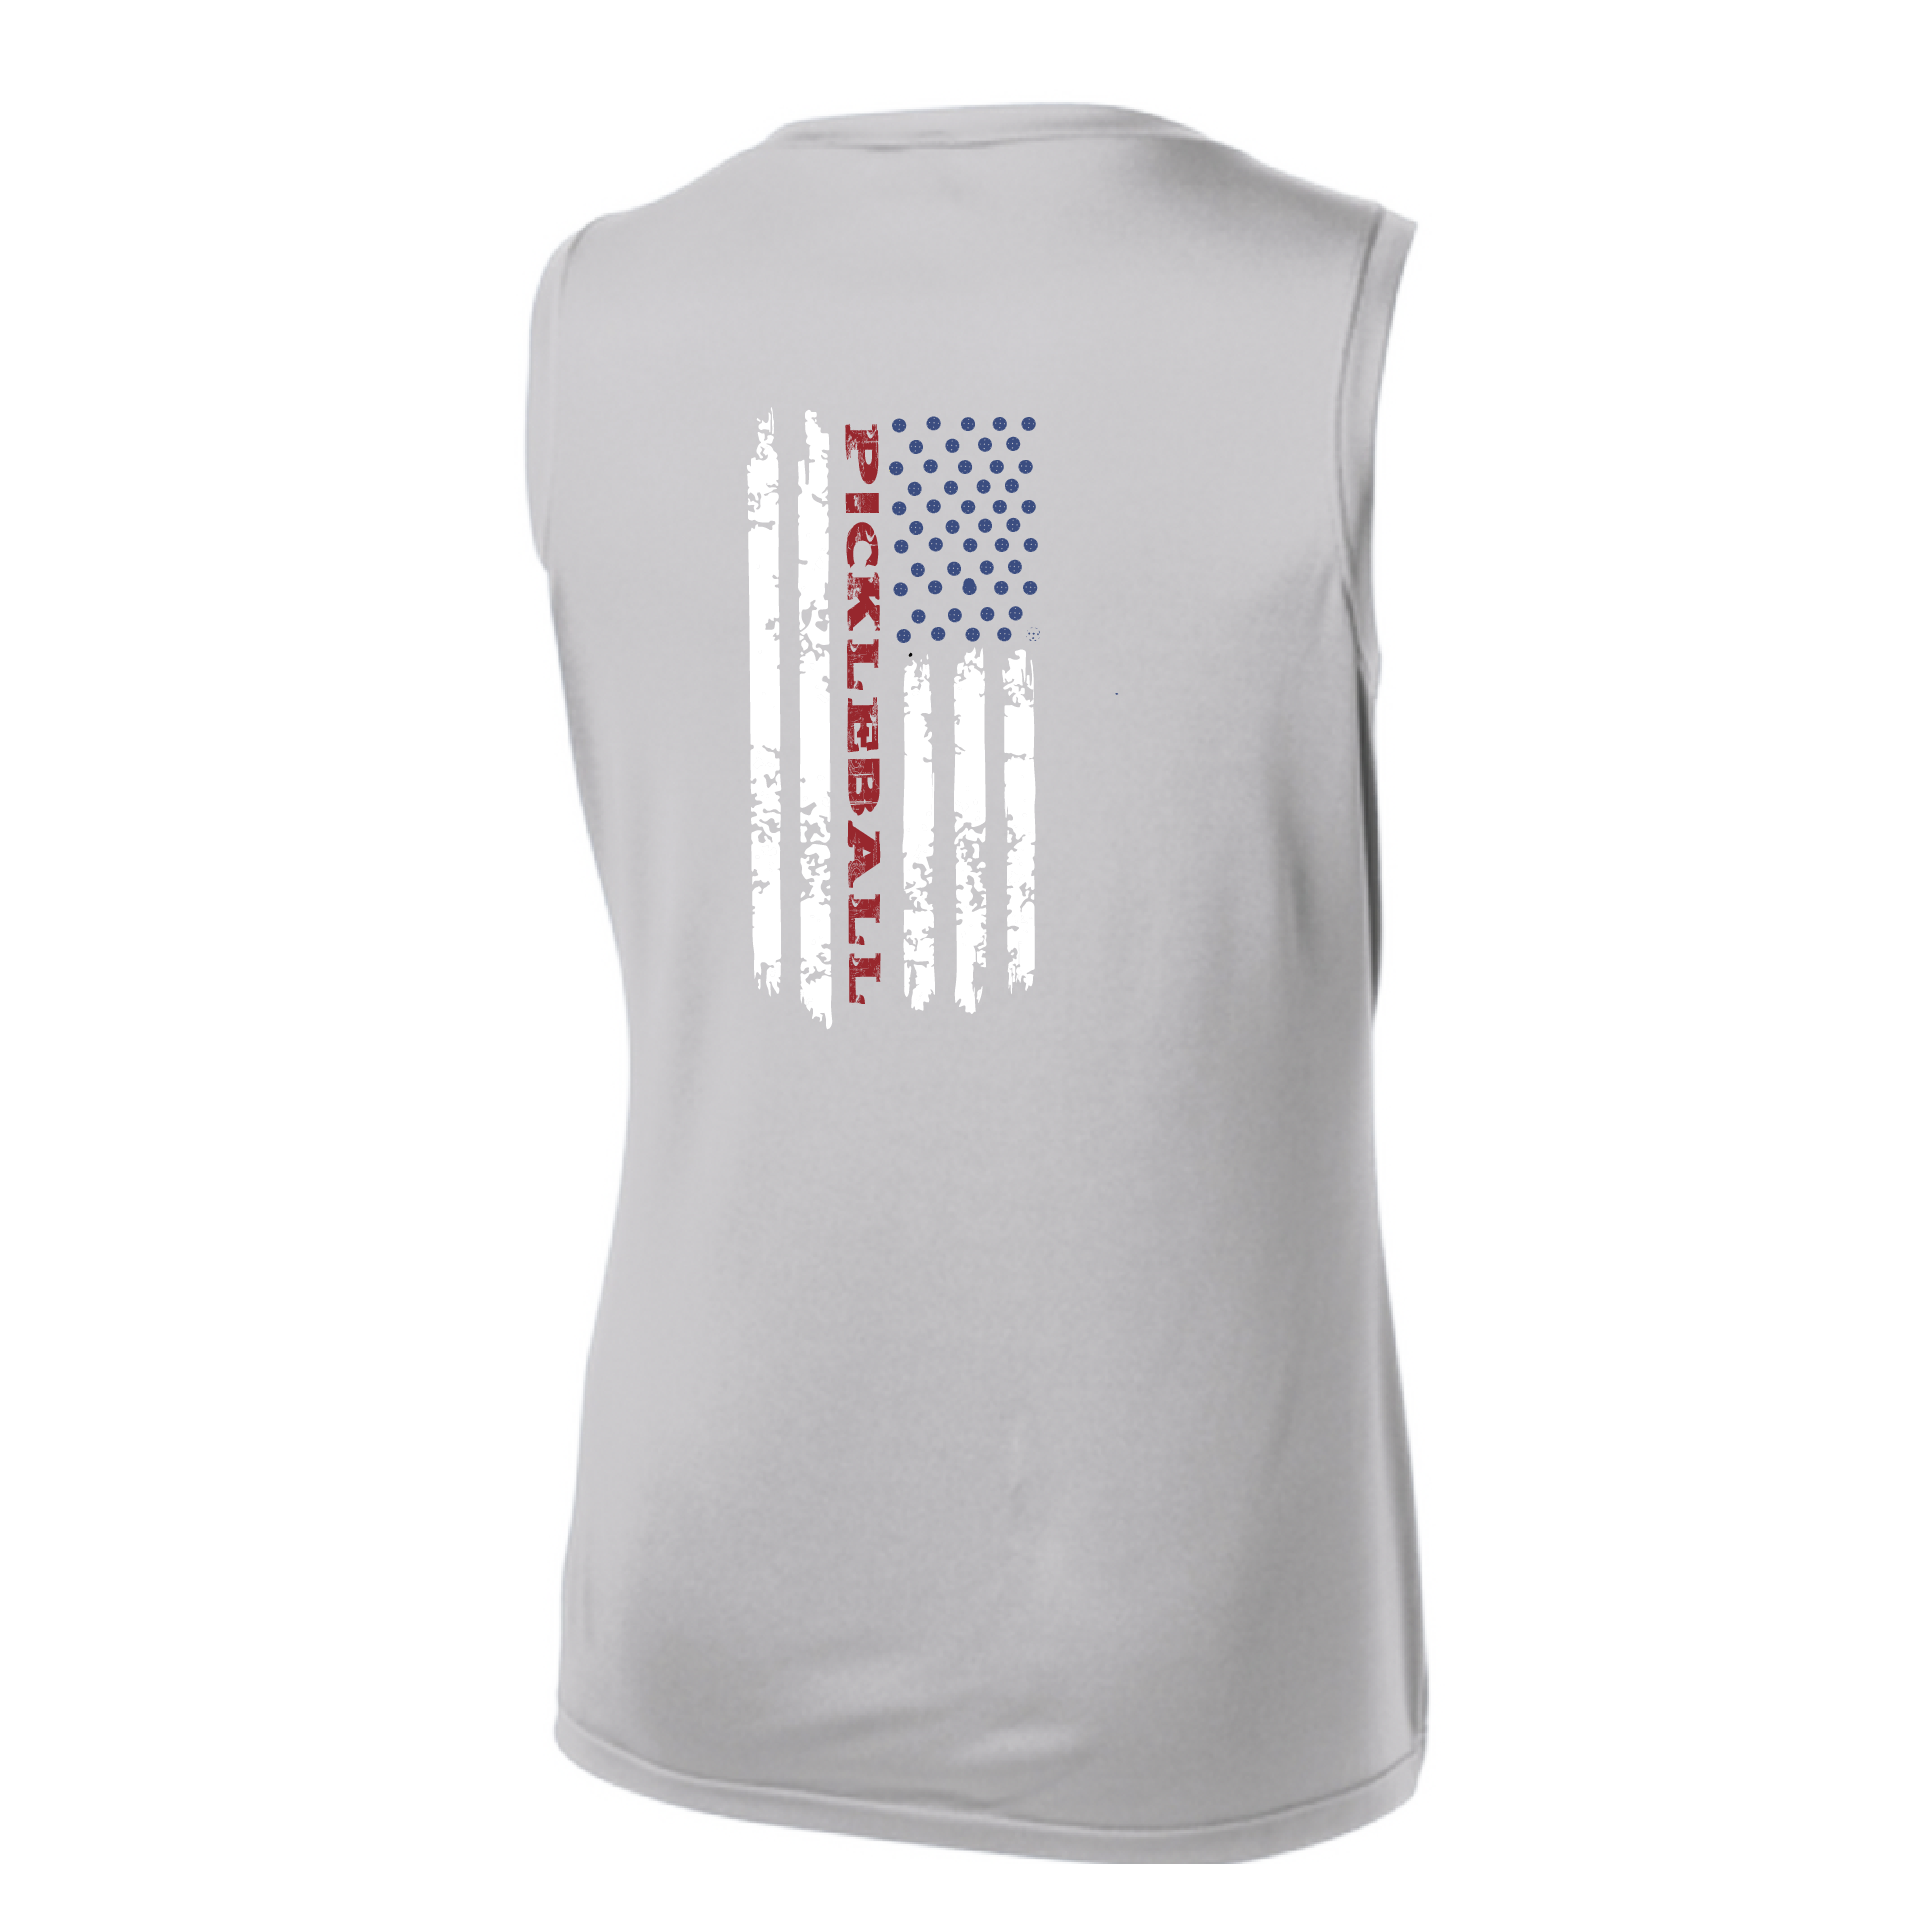 Pickleball Design: Pickleball Flag Vertical on Front or Back of Shirt  Women's Style: Sleeveless V-Neck Tank  Turn up the volume in this Women's shirt with its perfect mix of softness and attitude. Material is ultra-comfortable with moisture wicking properties and tri-blend softness. PosiCharge technology locks in color. Highly breathable and lightweight.